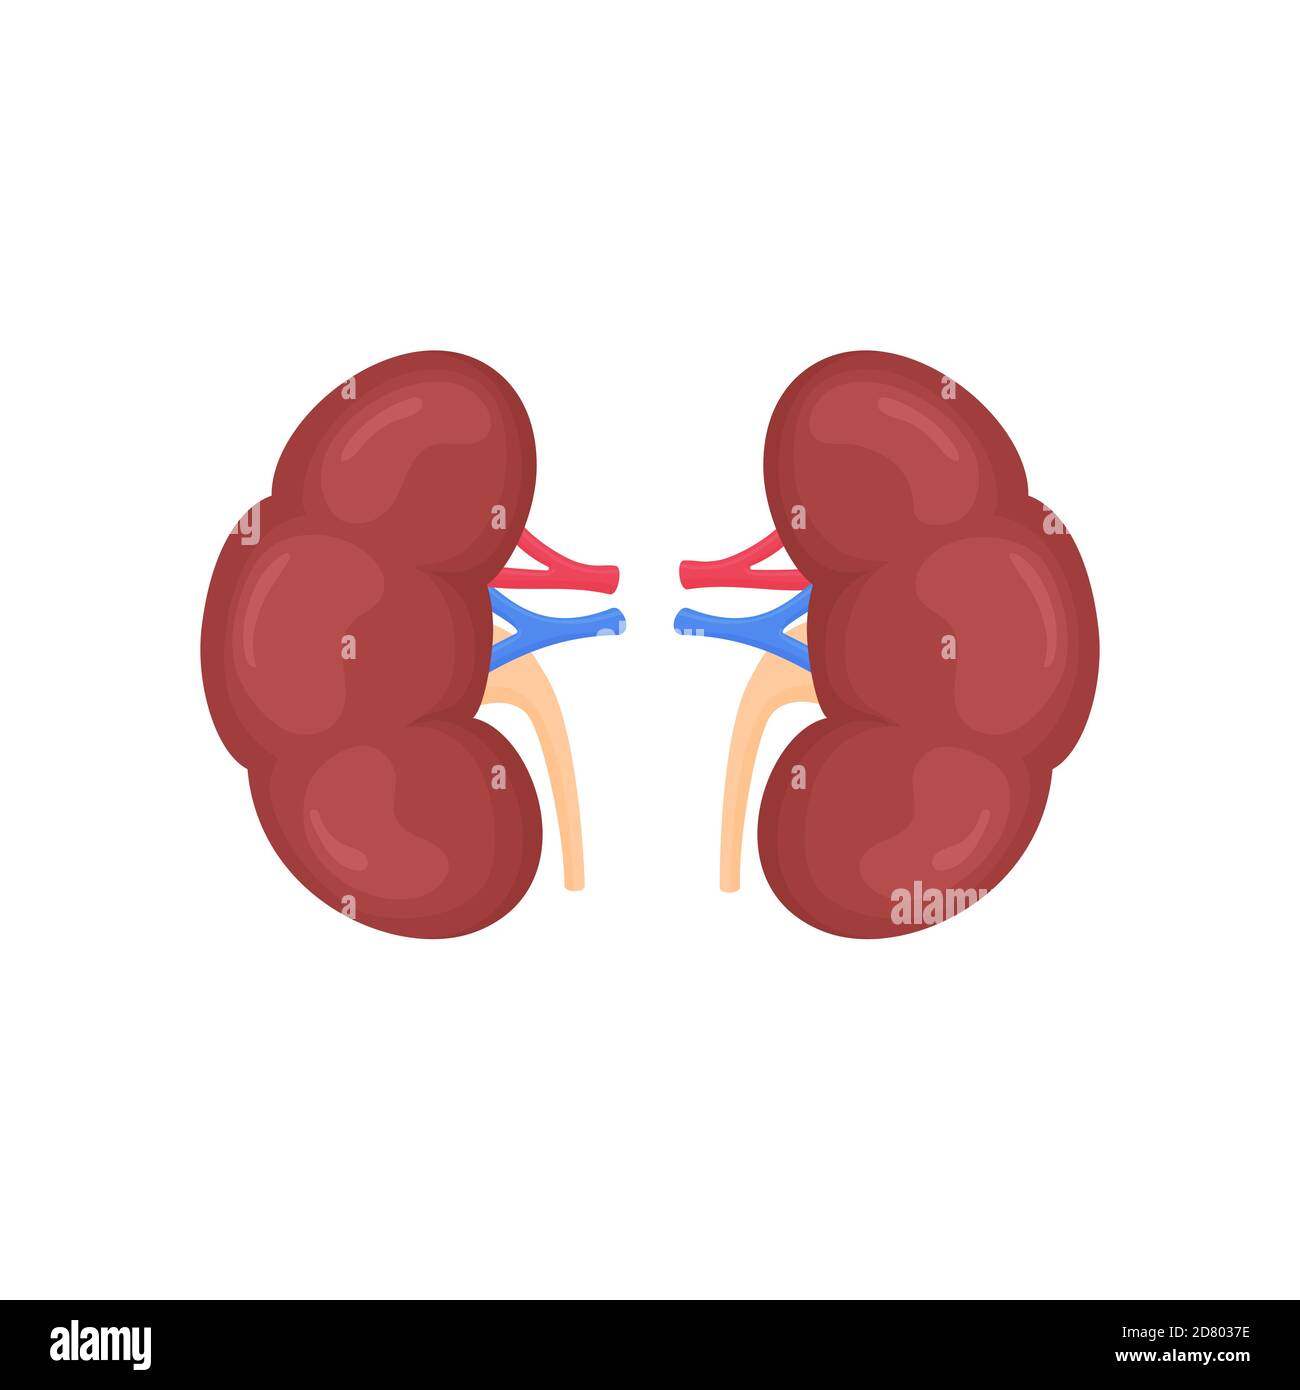 Anatomical colorful human kidneys scientifically accurate on white background. Medical science anatomy illustration. Stock Vector